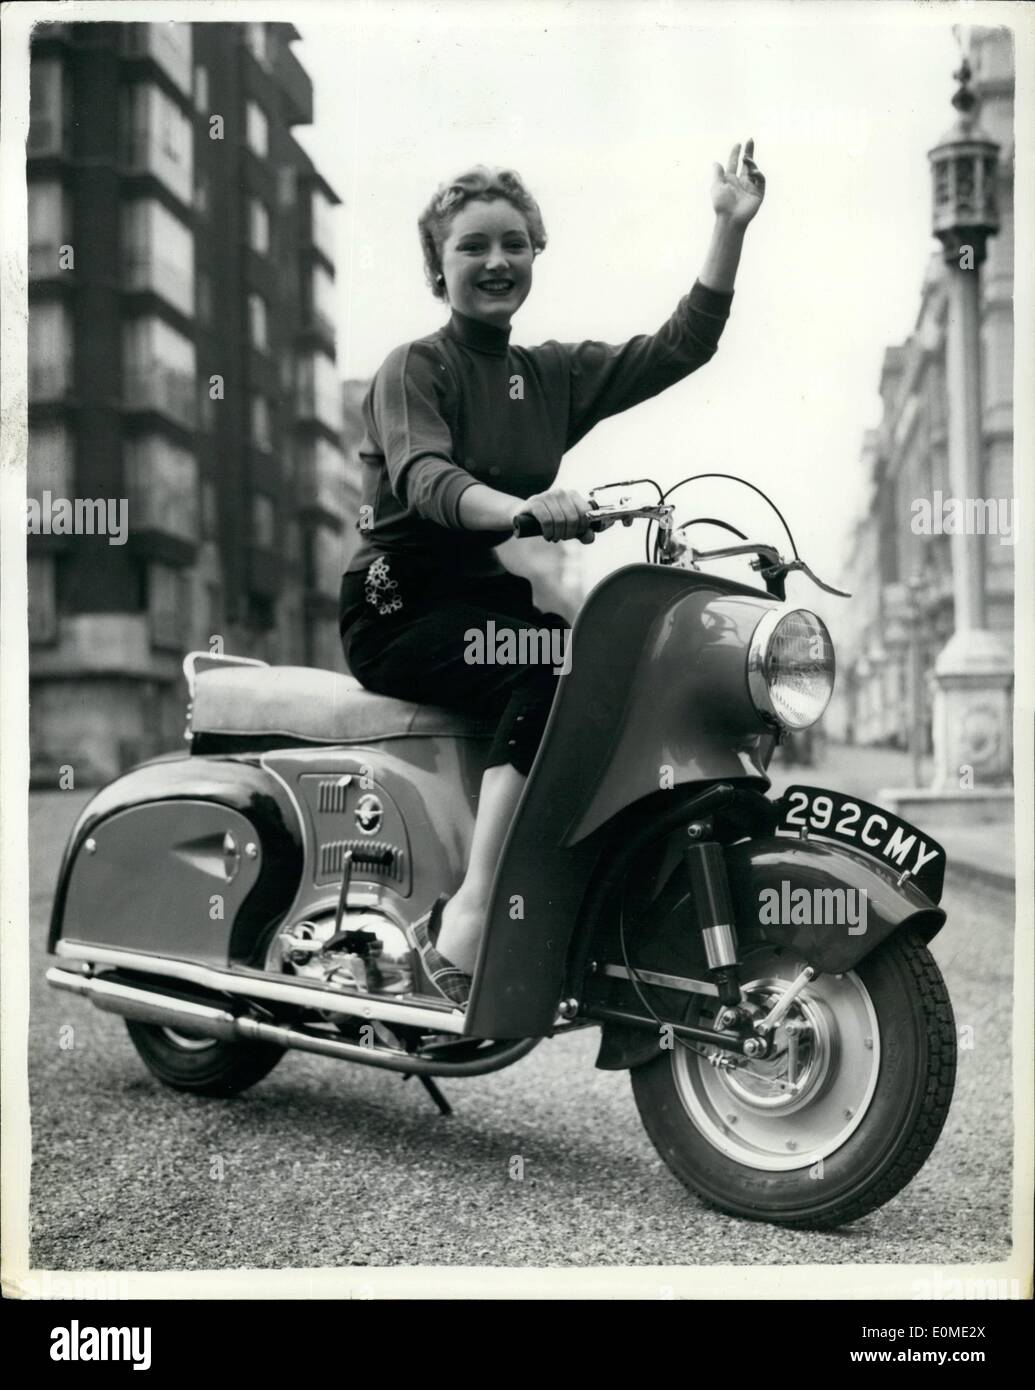 Nov. 11, 1954 - Introducing the ''Albatross'' - New All-British motor scooter. Does over 80 m.p. Gallon.:The ''Albatross'' - new All-British motor scooter - the first to compete with the Continental designs has put in its appearance and will be shown to the public for the first time at the Cycle and Motor Cycle Show next week. Built by the Dayton Cycle Company of Park Royal, London - the machine is an ideal runabout and is also a comfortable long-distance two-seat tourer. Powered by a 225 c.c Villiers two - stroke engine it can cruise all day at 55 - 60 m.p.h. has a top speed of over 65 m.p.h Stock Photo